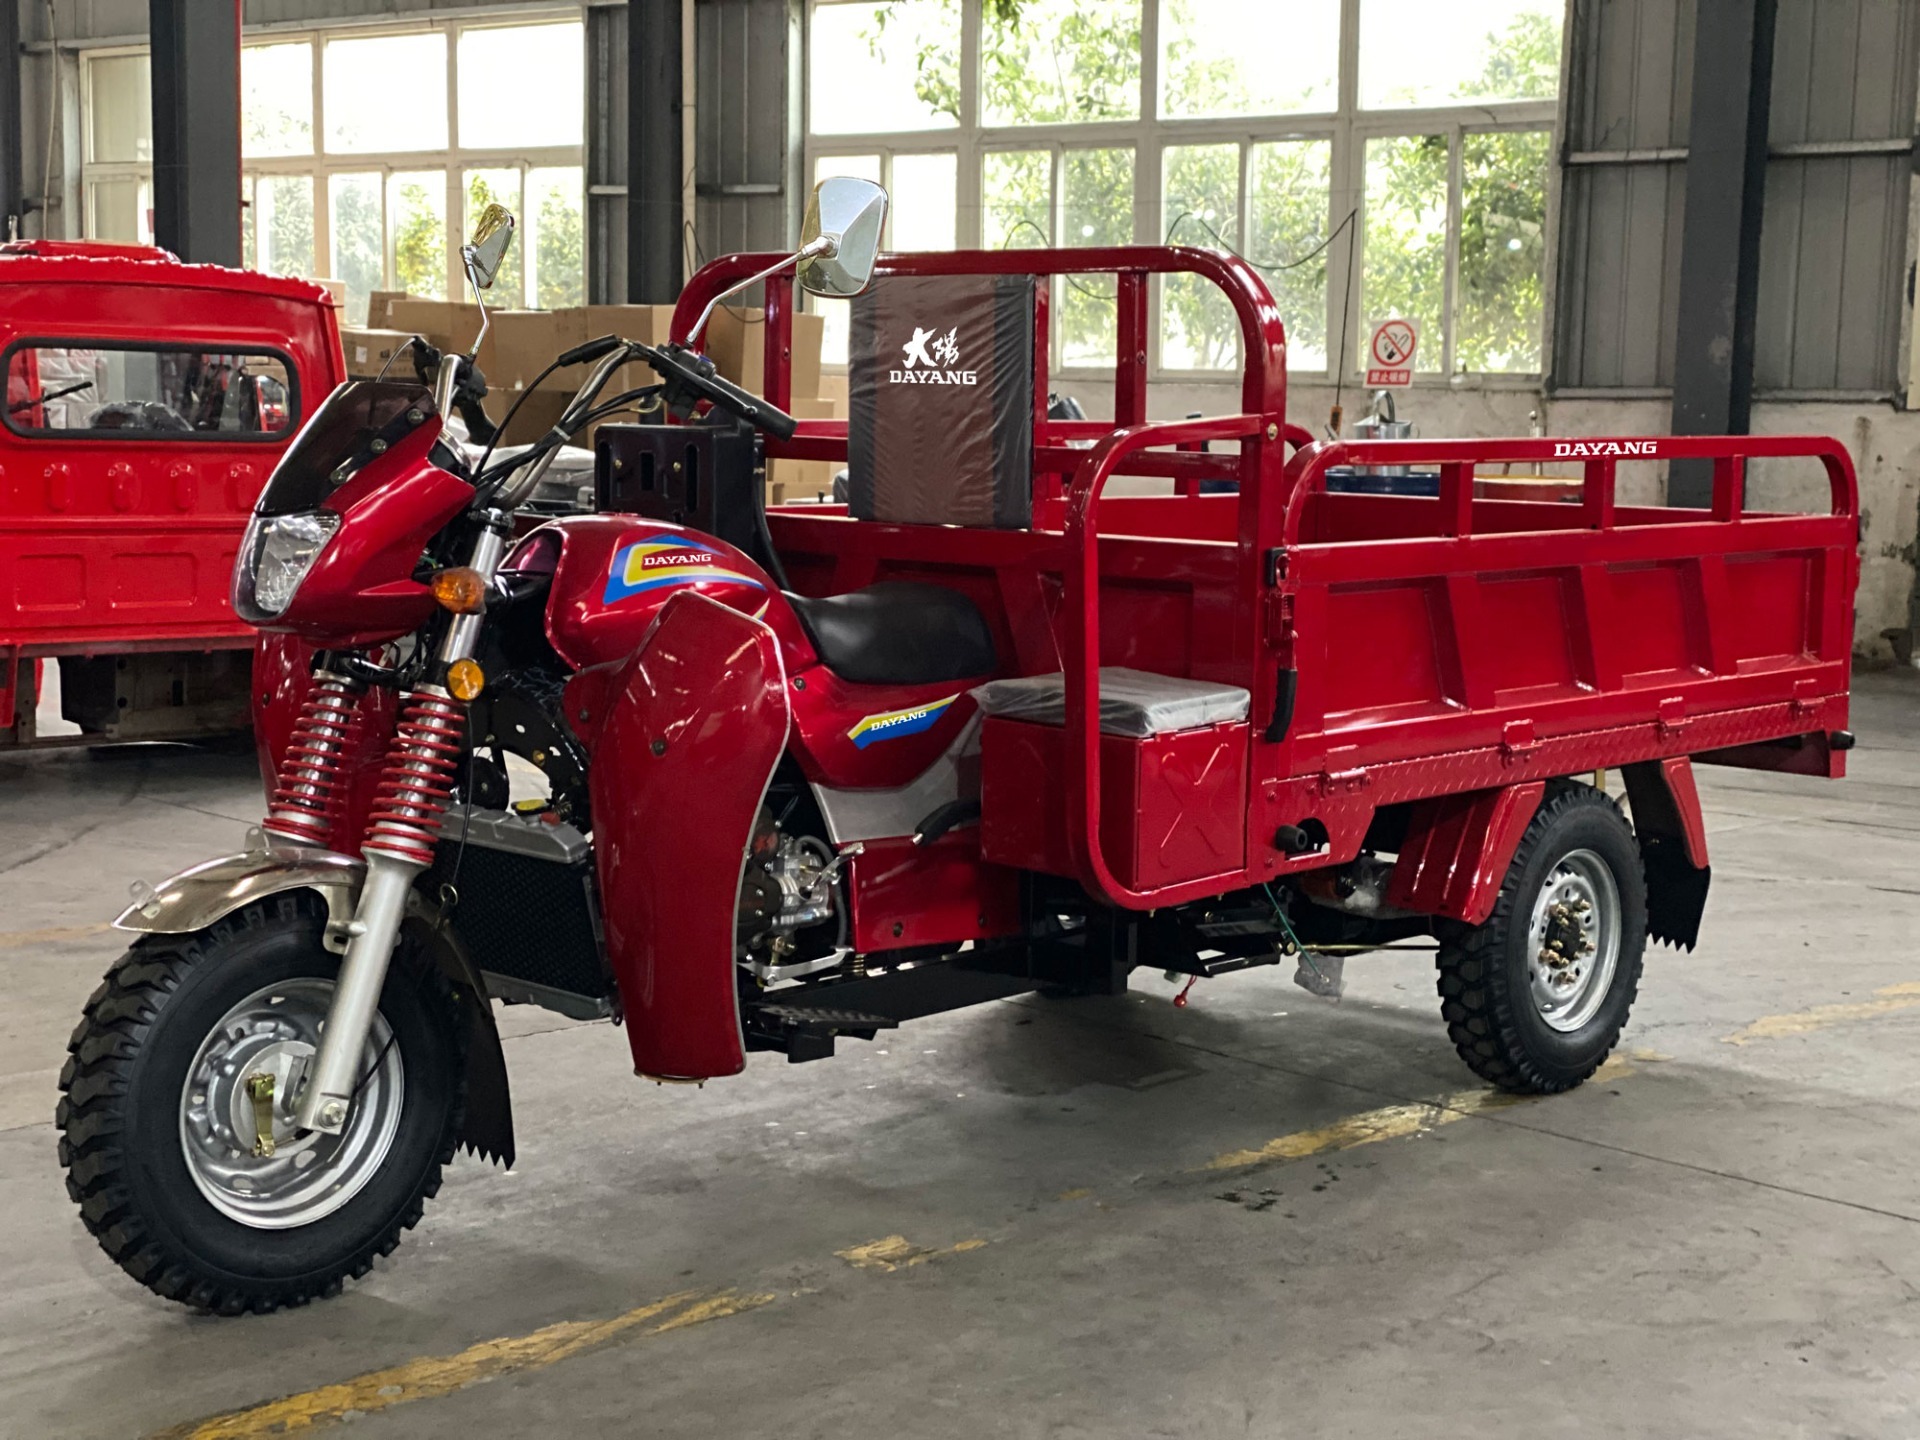 DY-WW1 200CC DAYANG brand cargo tricycle for selling